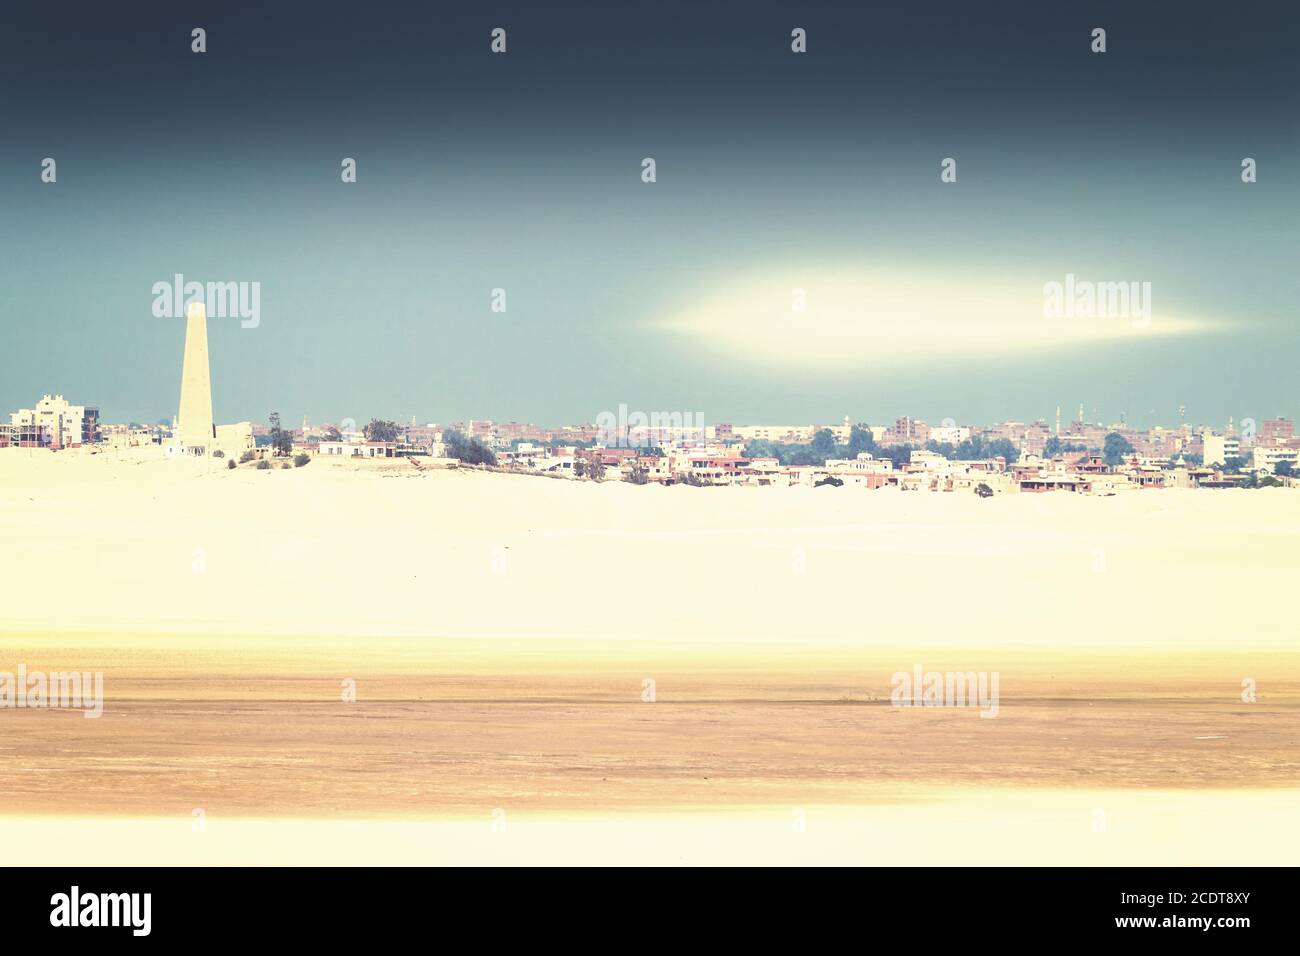 View of the city of Ismailia with light reflex in the sky Stock Photo